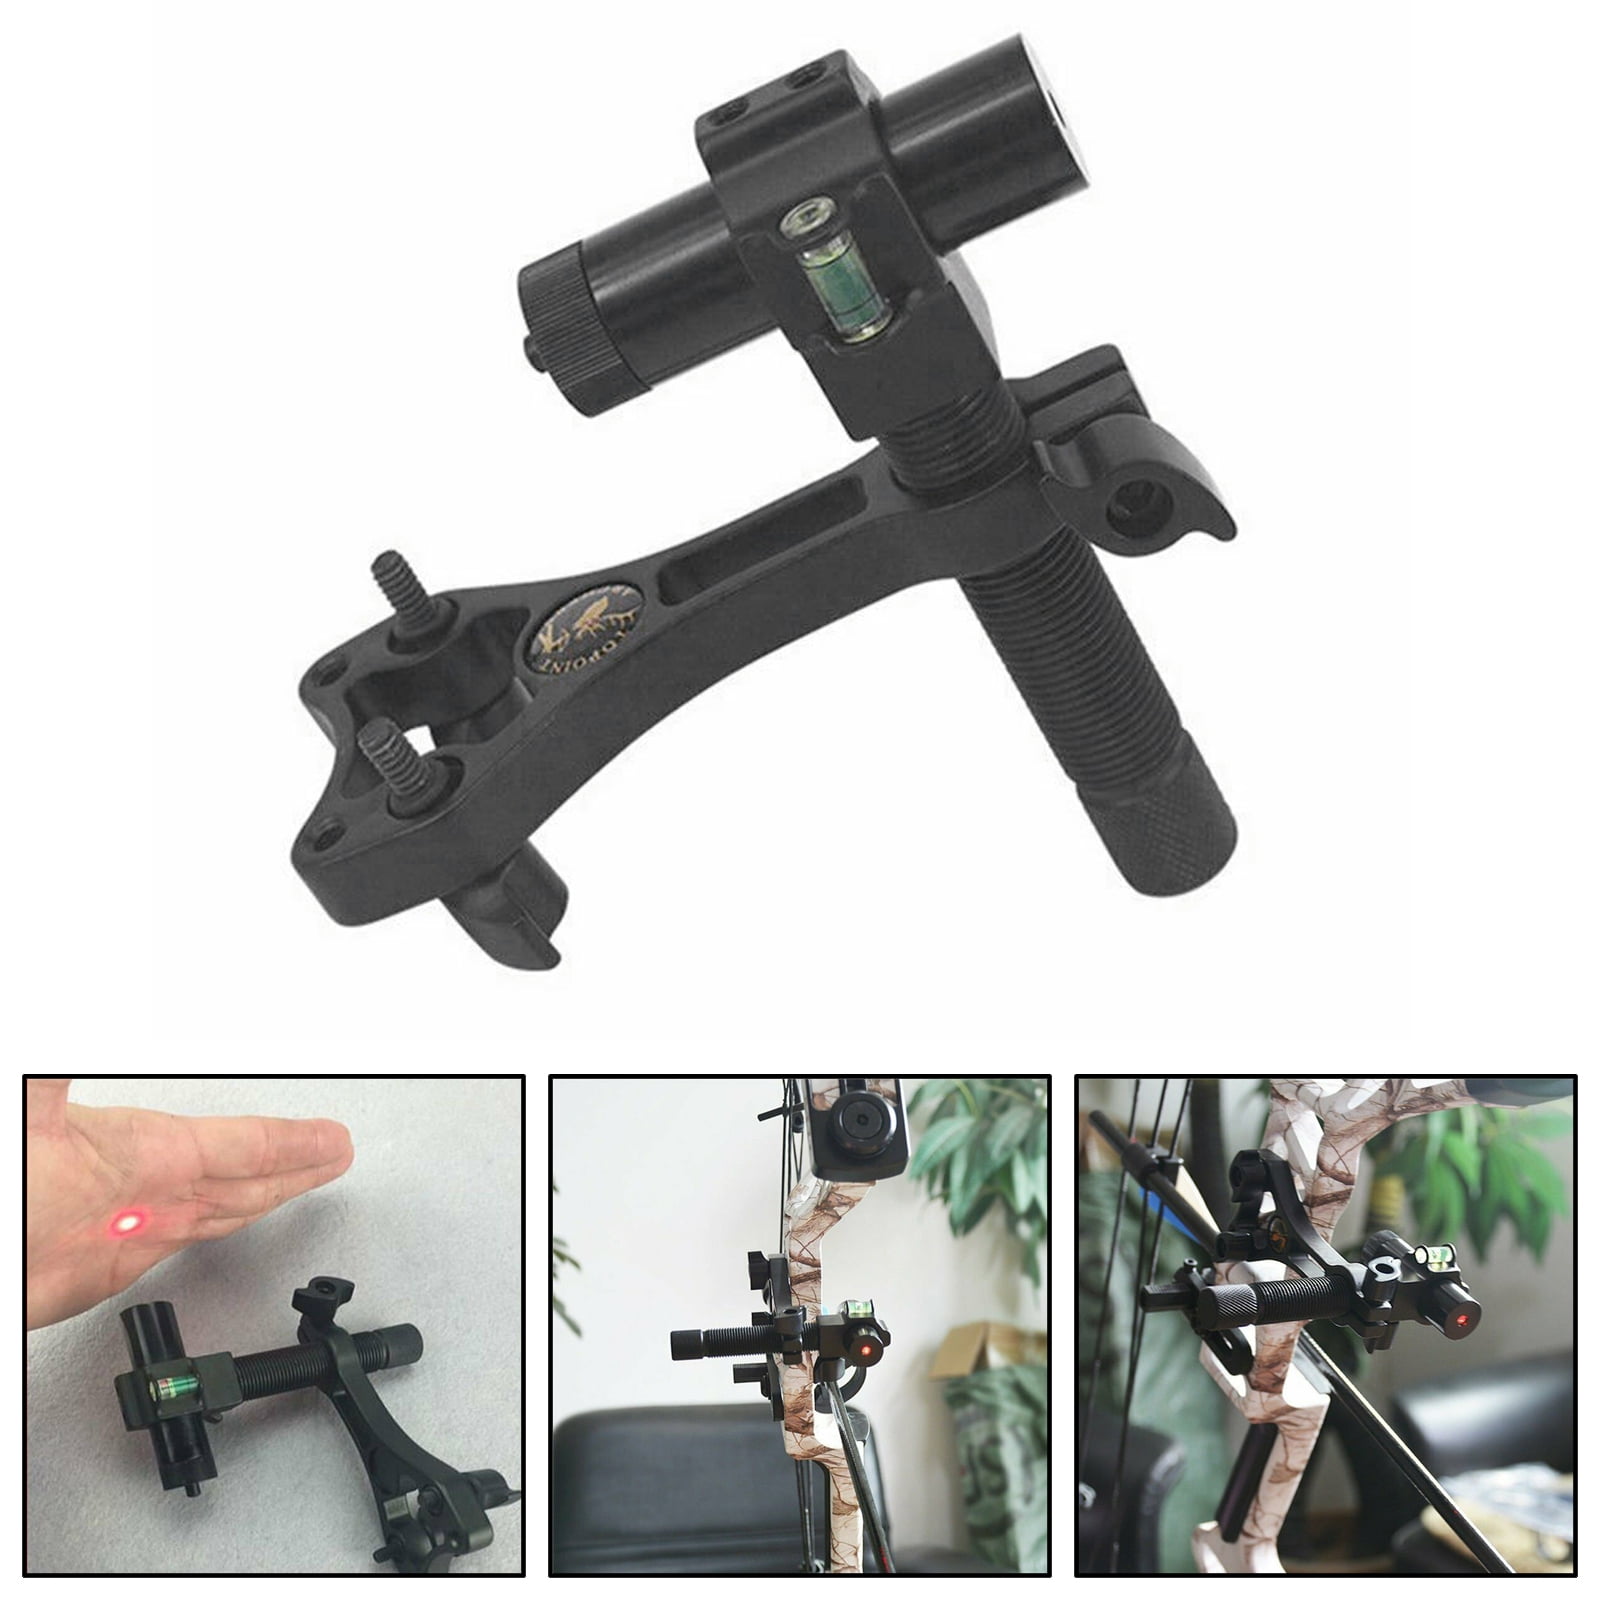 Details about   Archery Center Laser Sight Aligner Alignment for Compound Bow Huntin Portable US 